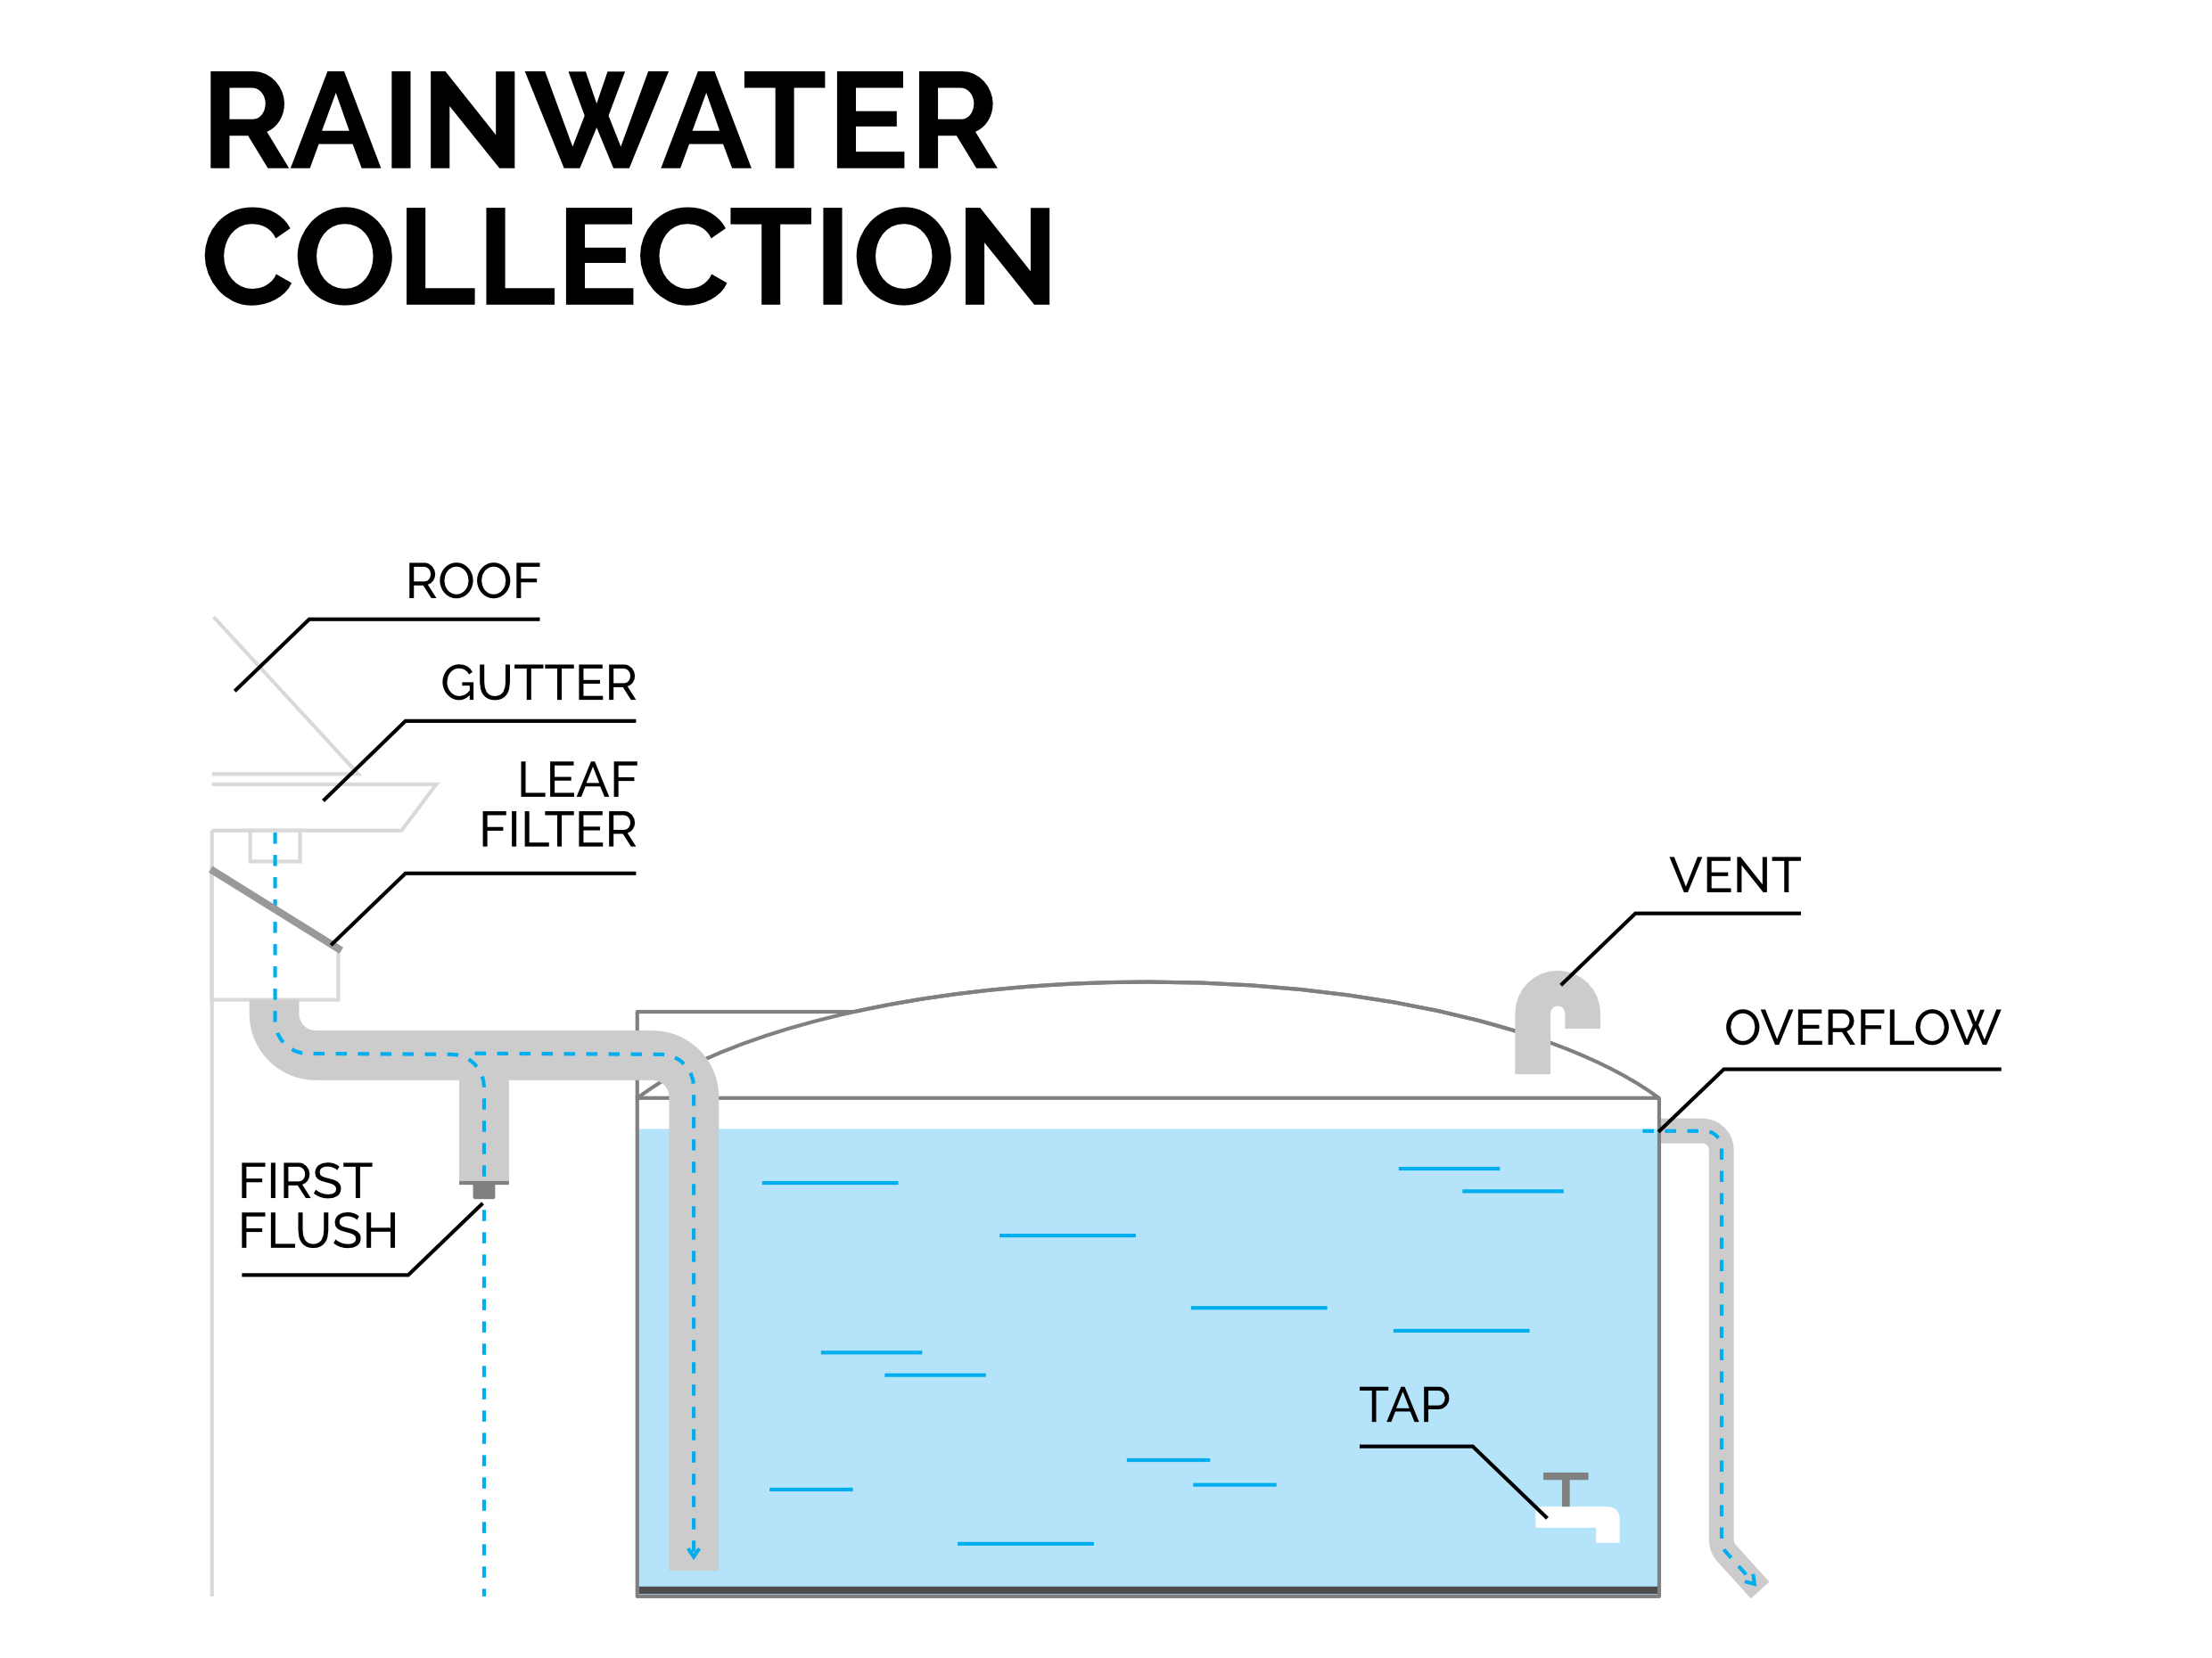 This picture shows all the parts of a rainwater collection system from the roof to the pit